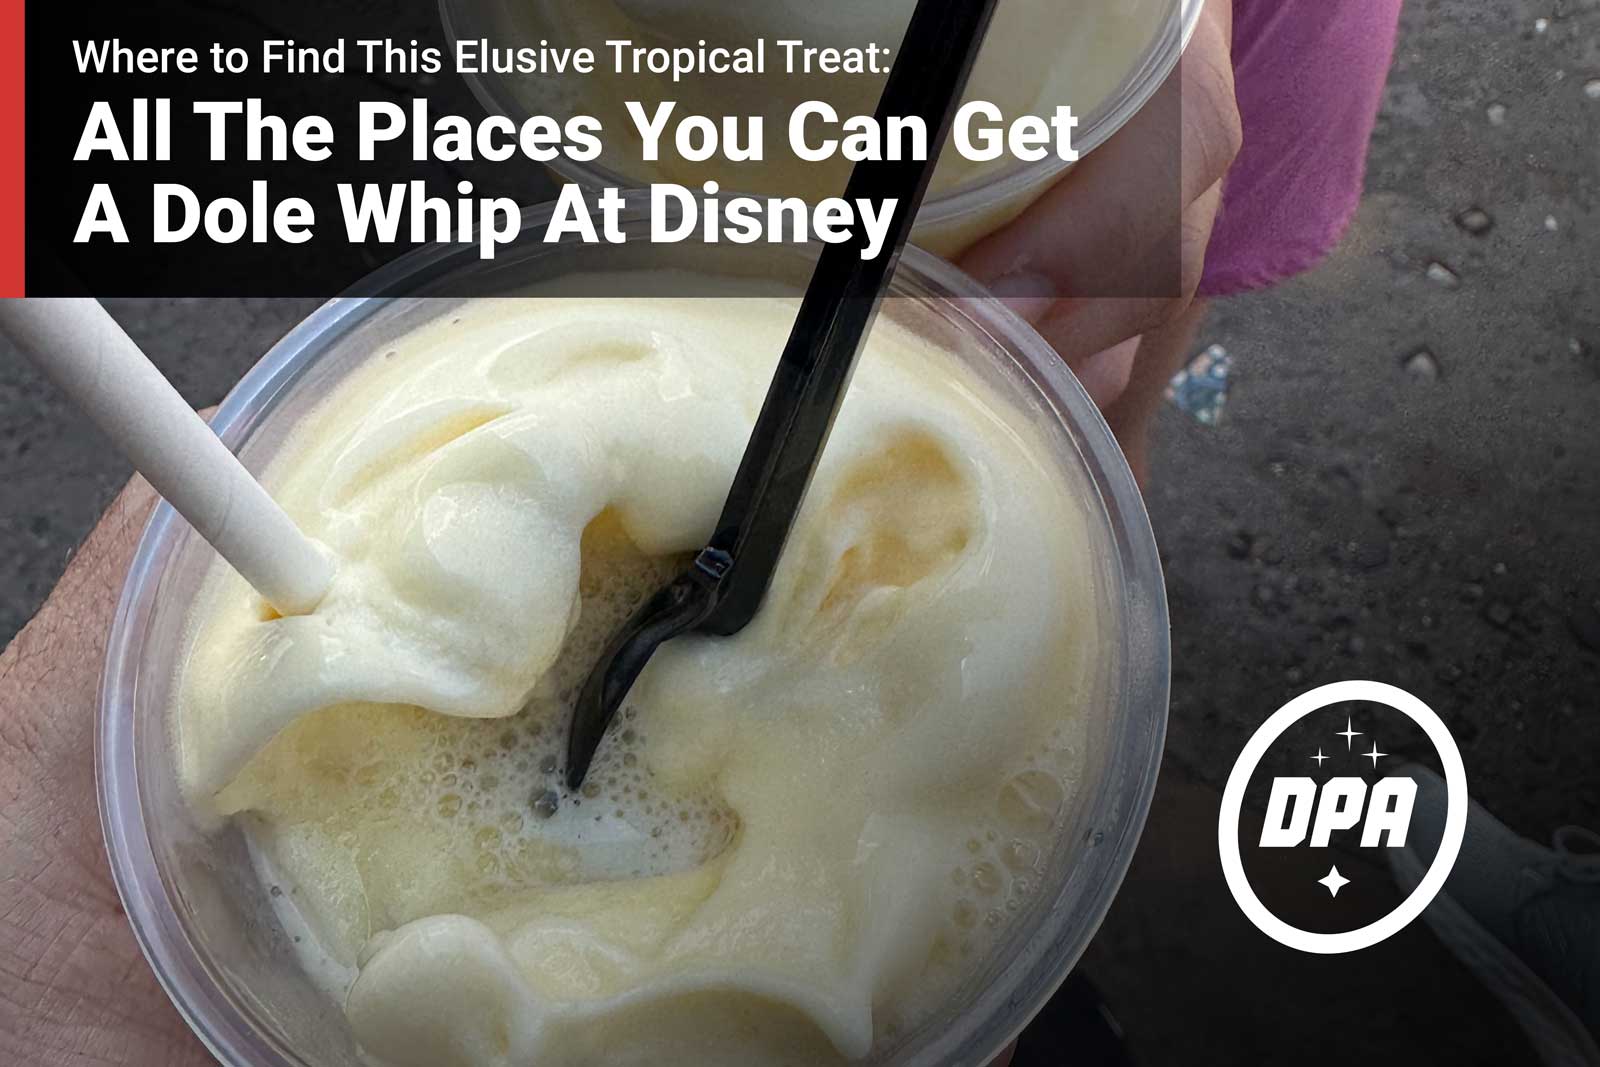 All The Places You Can Get A Dole Whip At Disney